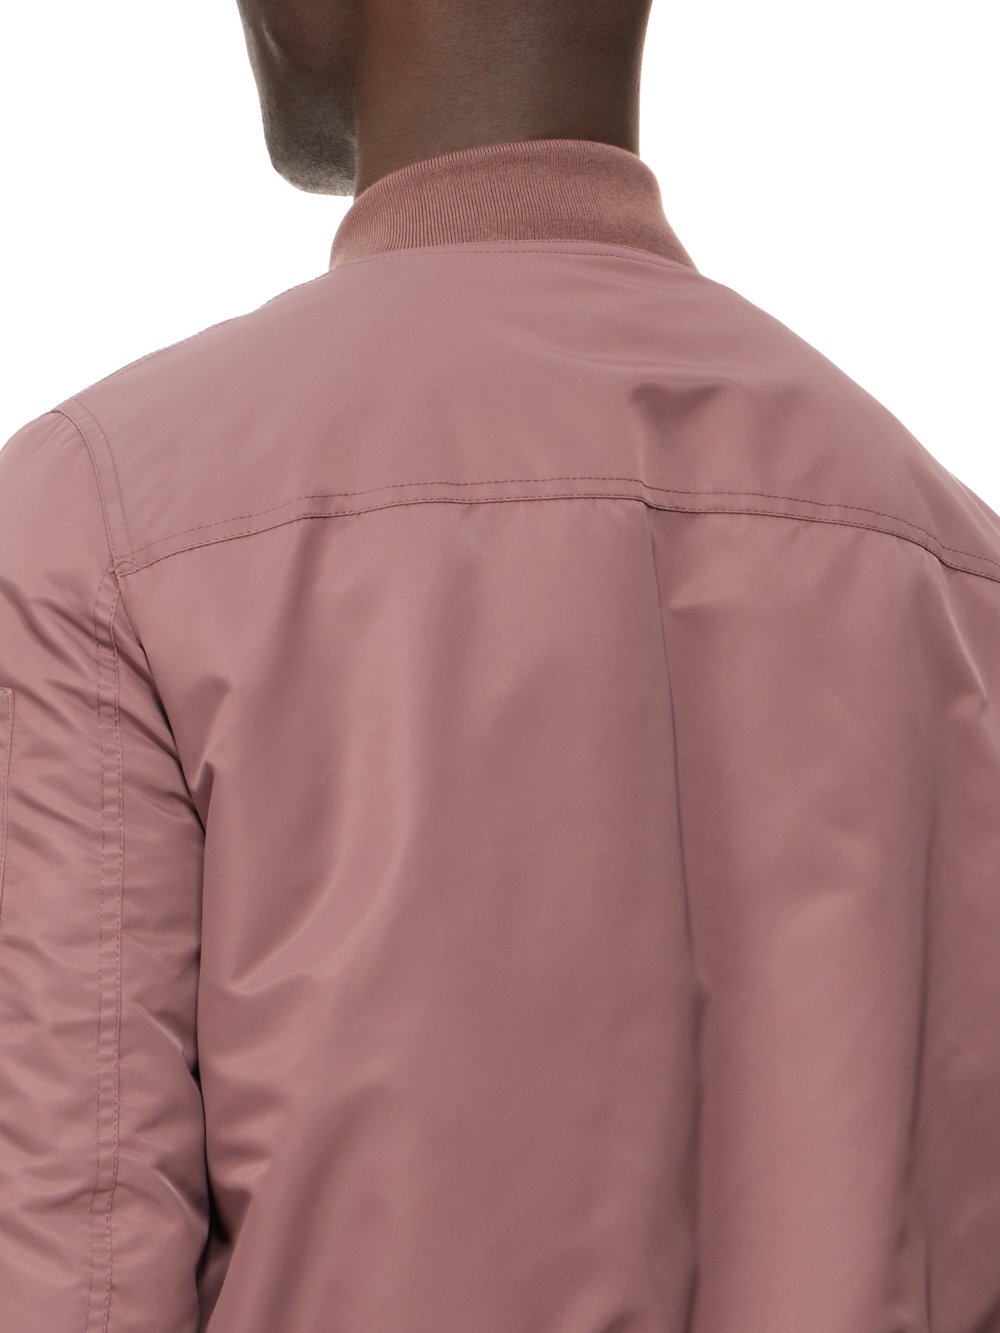 DRKSHDW FW23 LUXOR FLIGHT BOMBER IN MAUVE AND PALE GREEN RECYCLED BOMBER